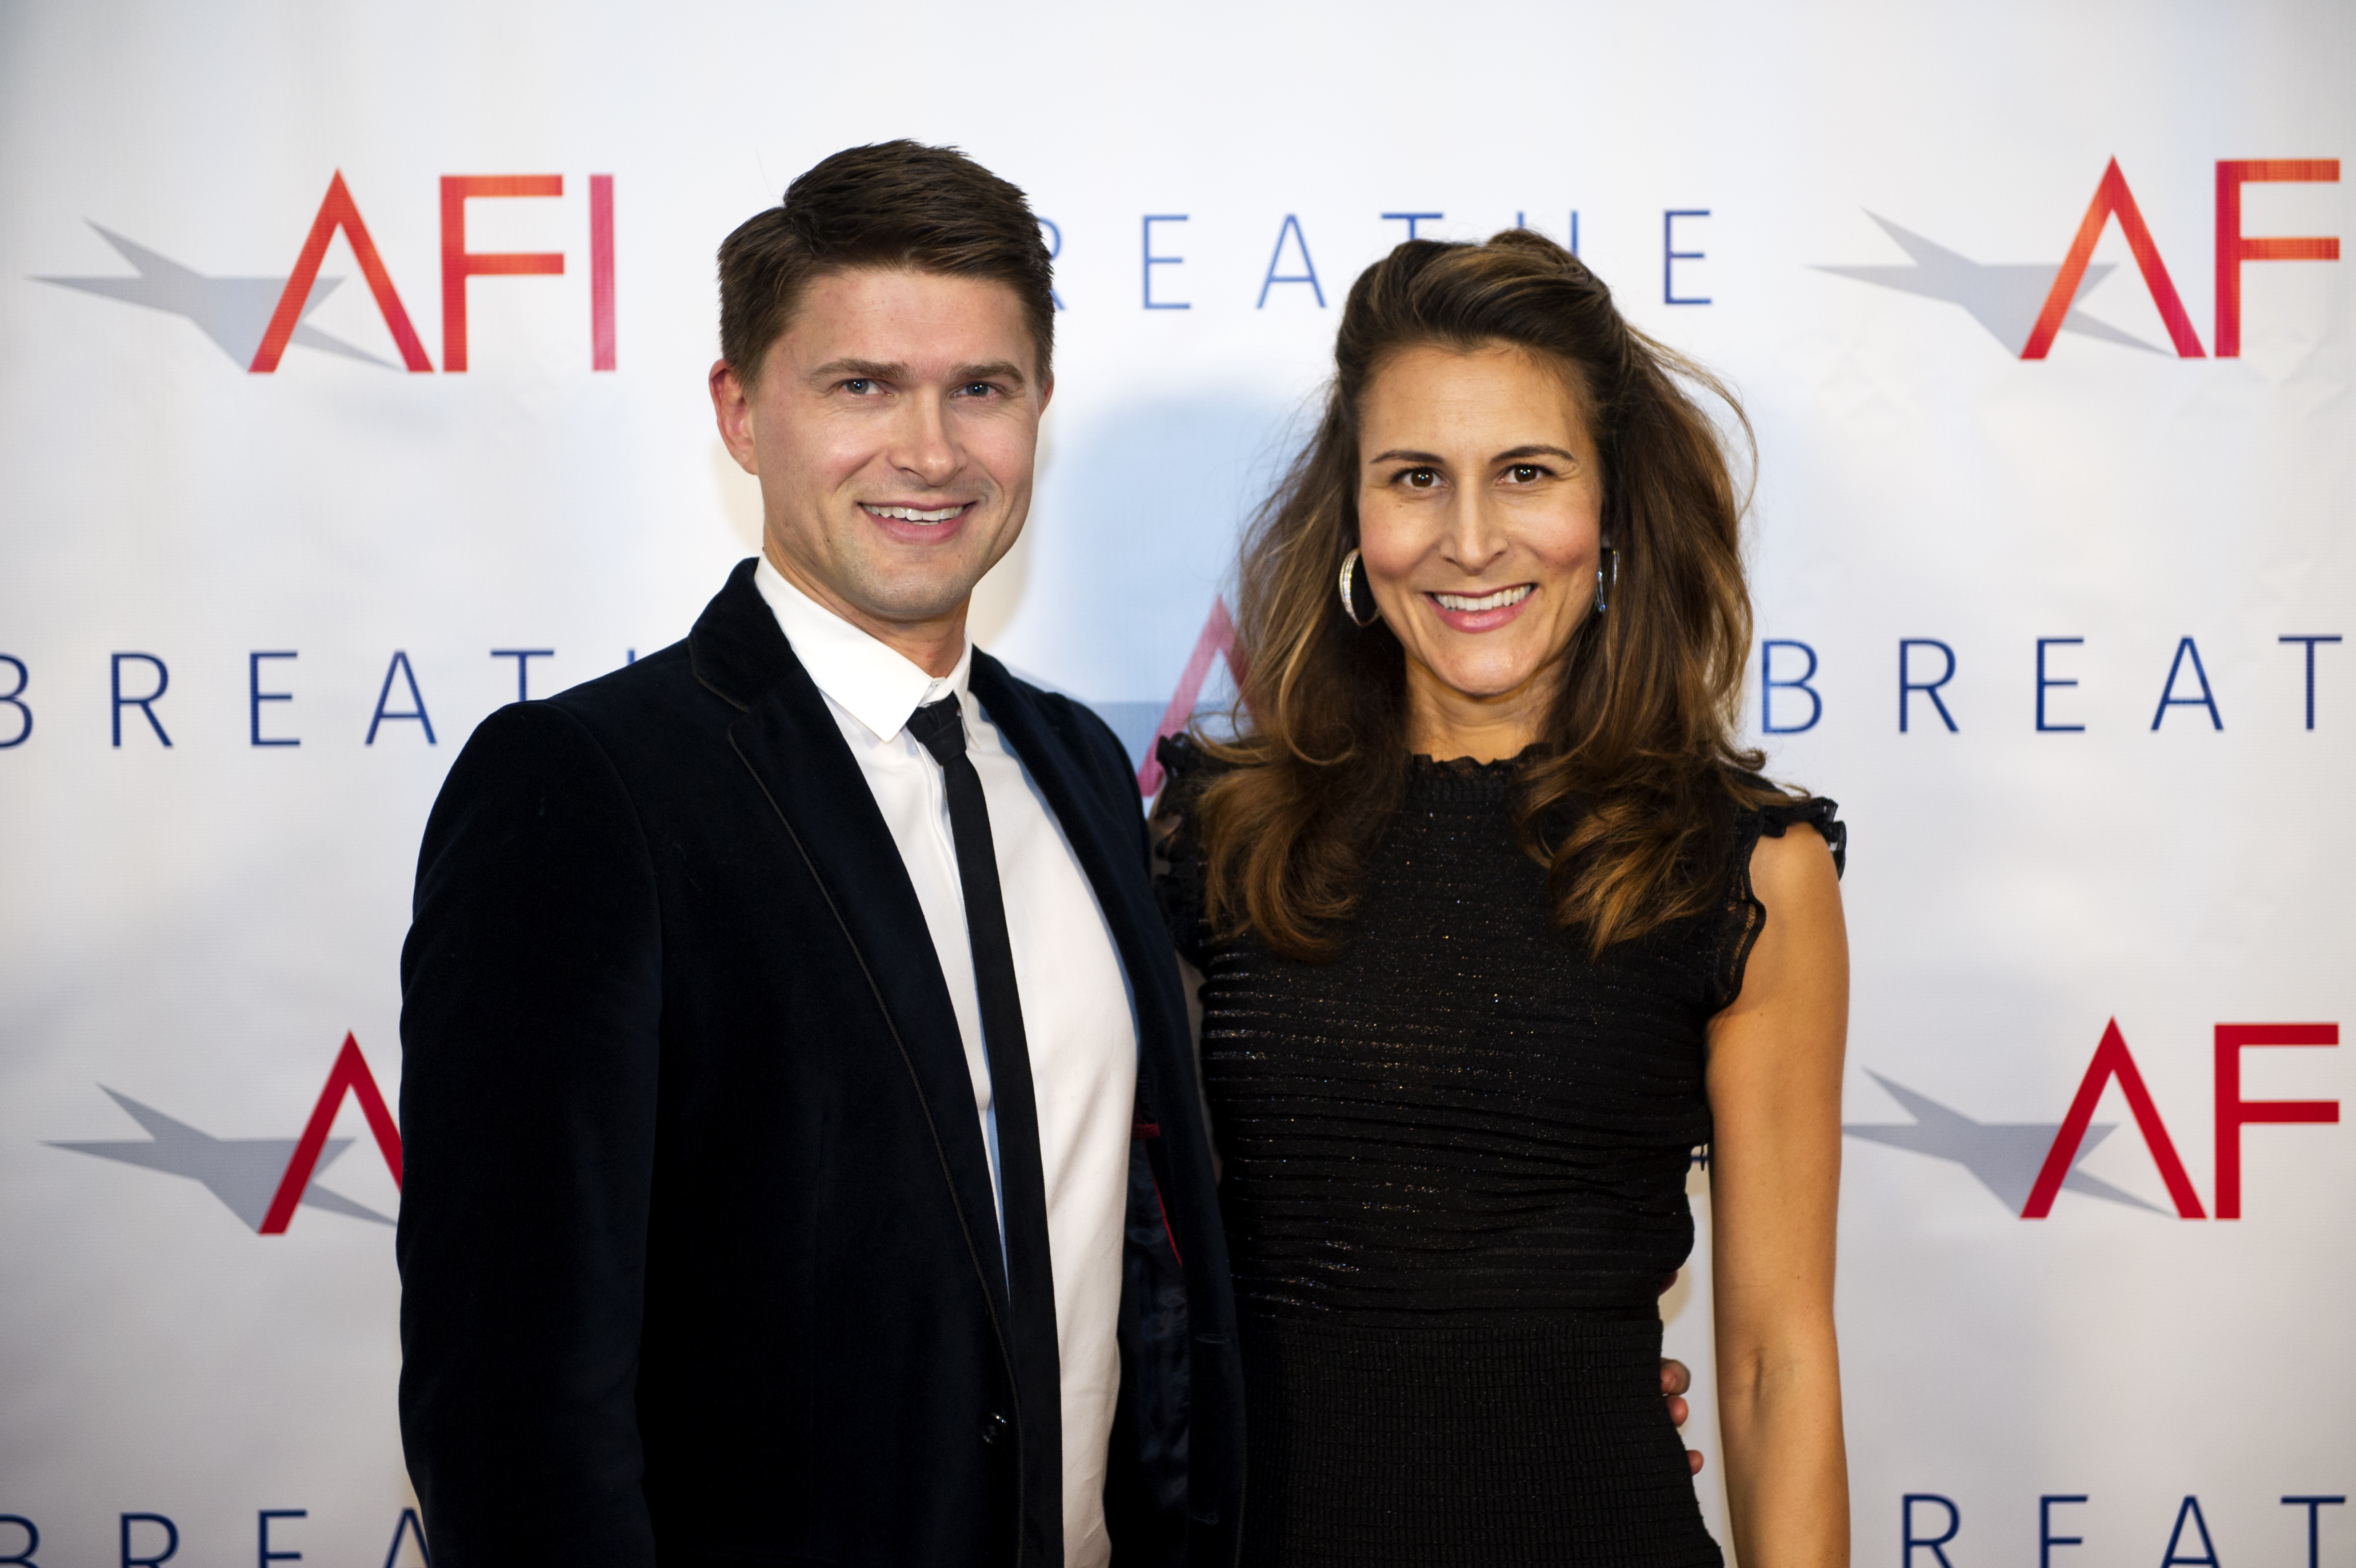 Christina Dow (Producer) and Paul Kowalski (Writer/ Director), at the AFI Premiere of 